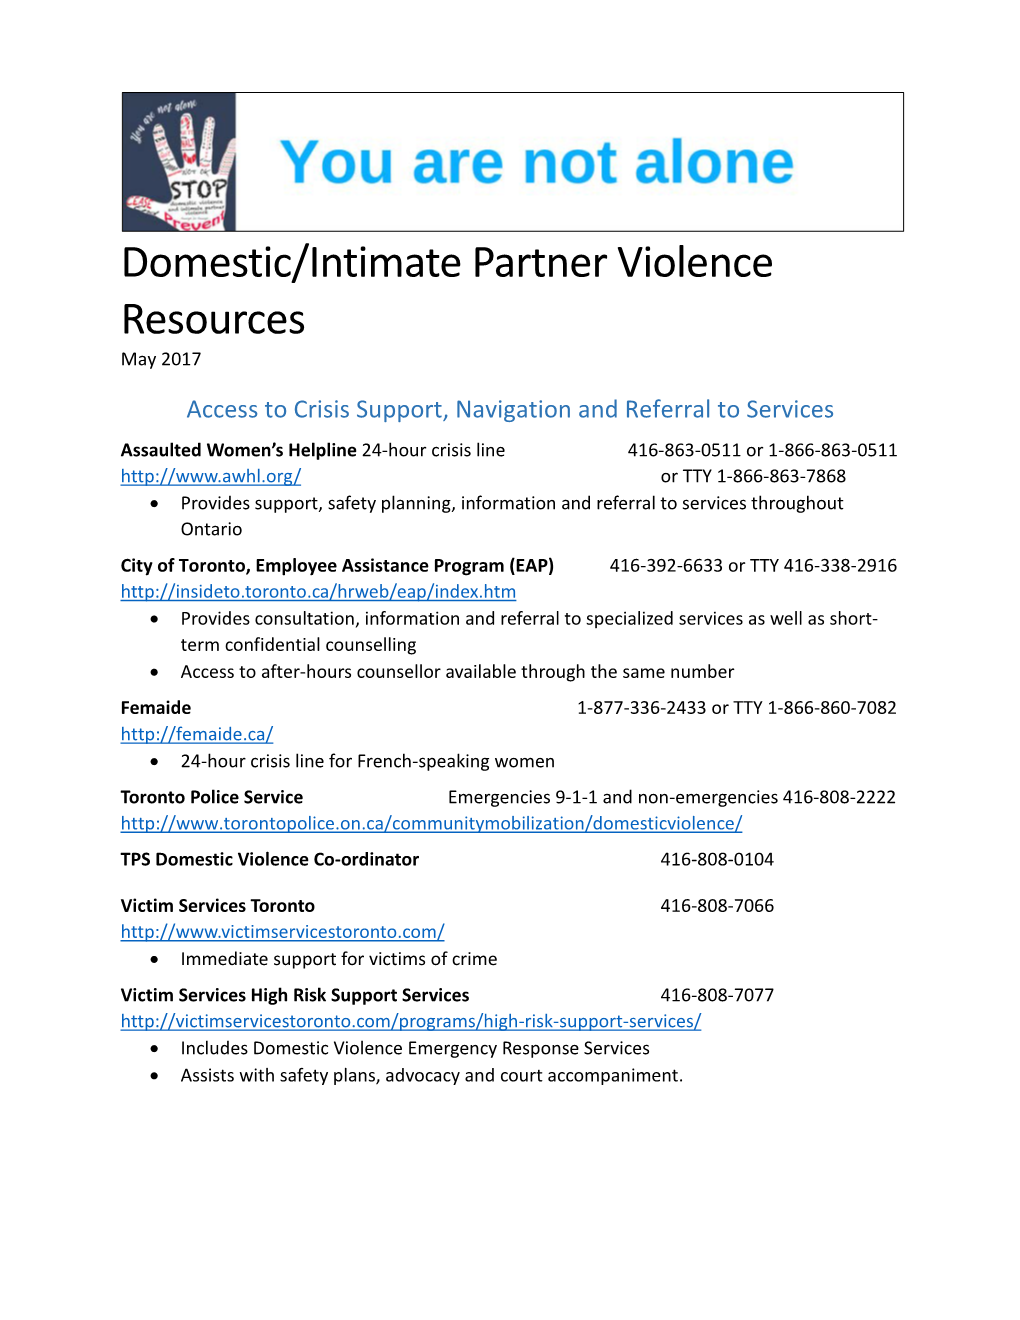 Domestic/Intimate Partner Violence Resources May 2017